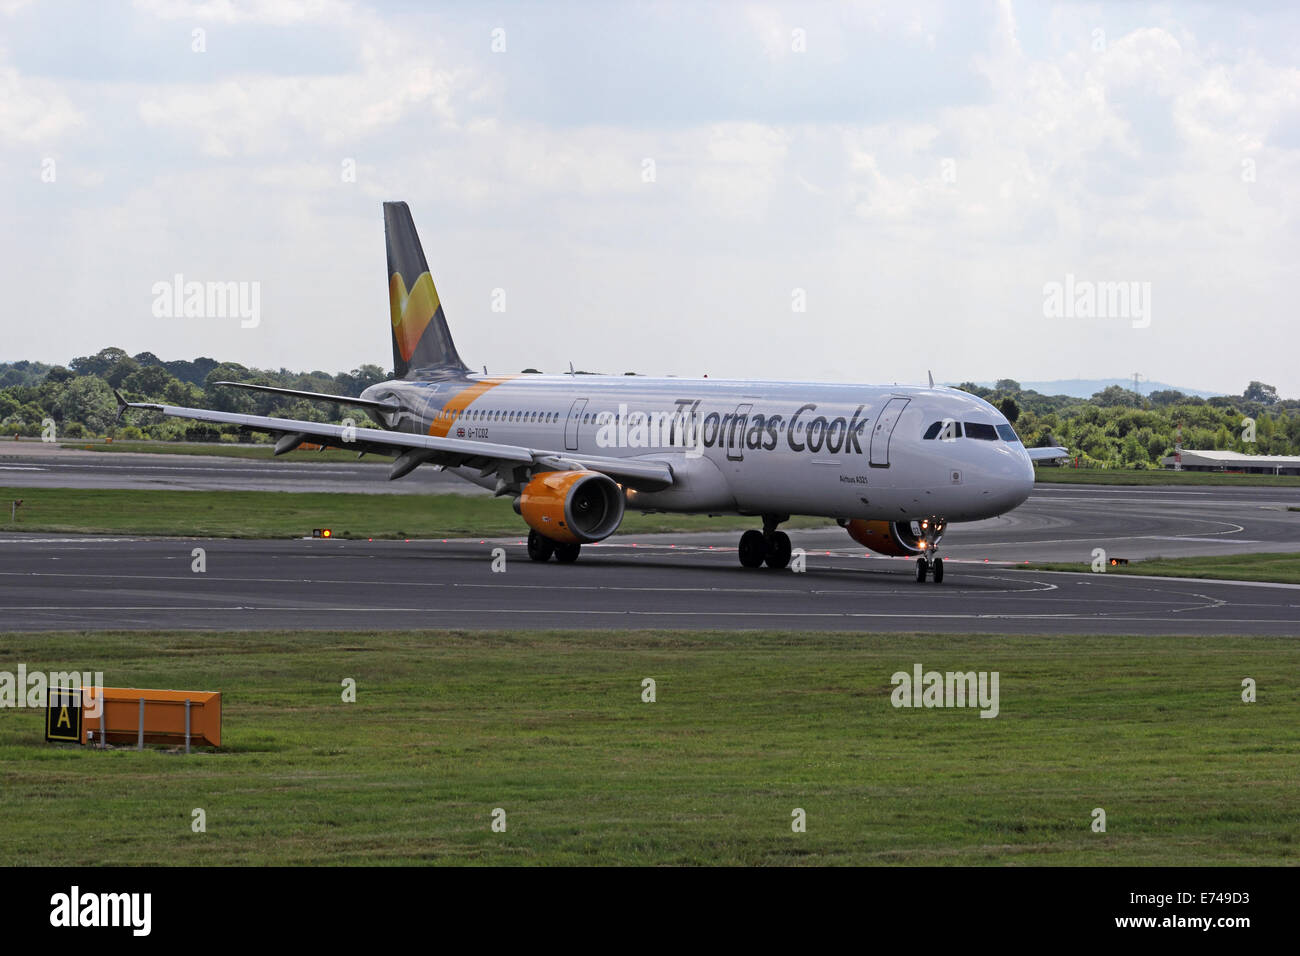 Thomas Cook Airlines Airbus A321-211 taxiing at Manchester International Airport Stock Photo